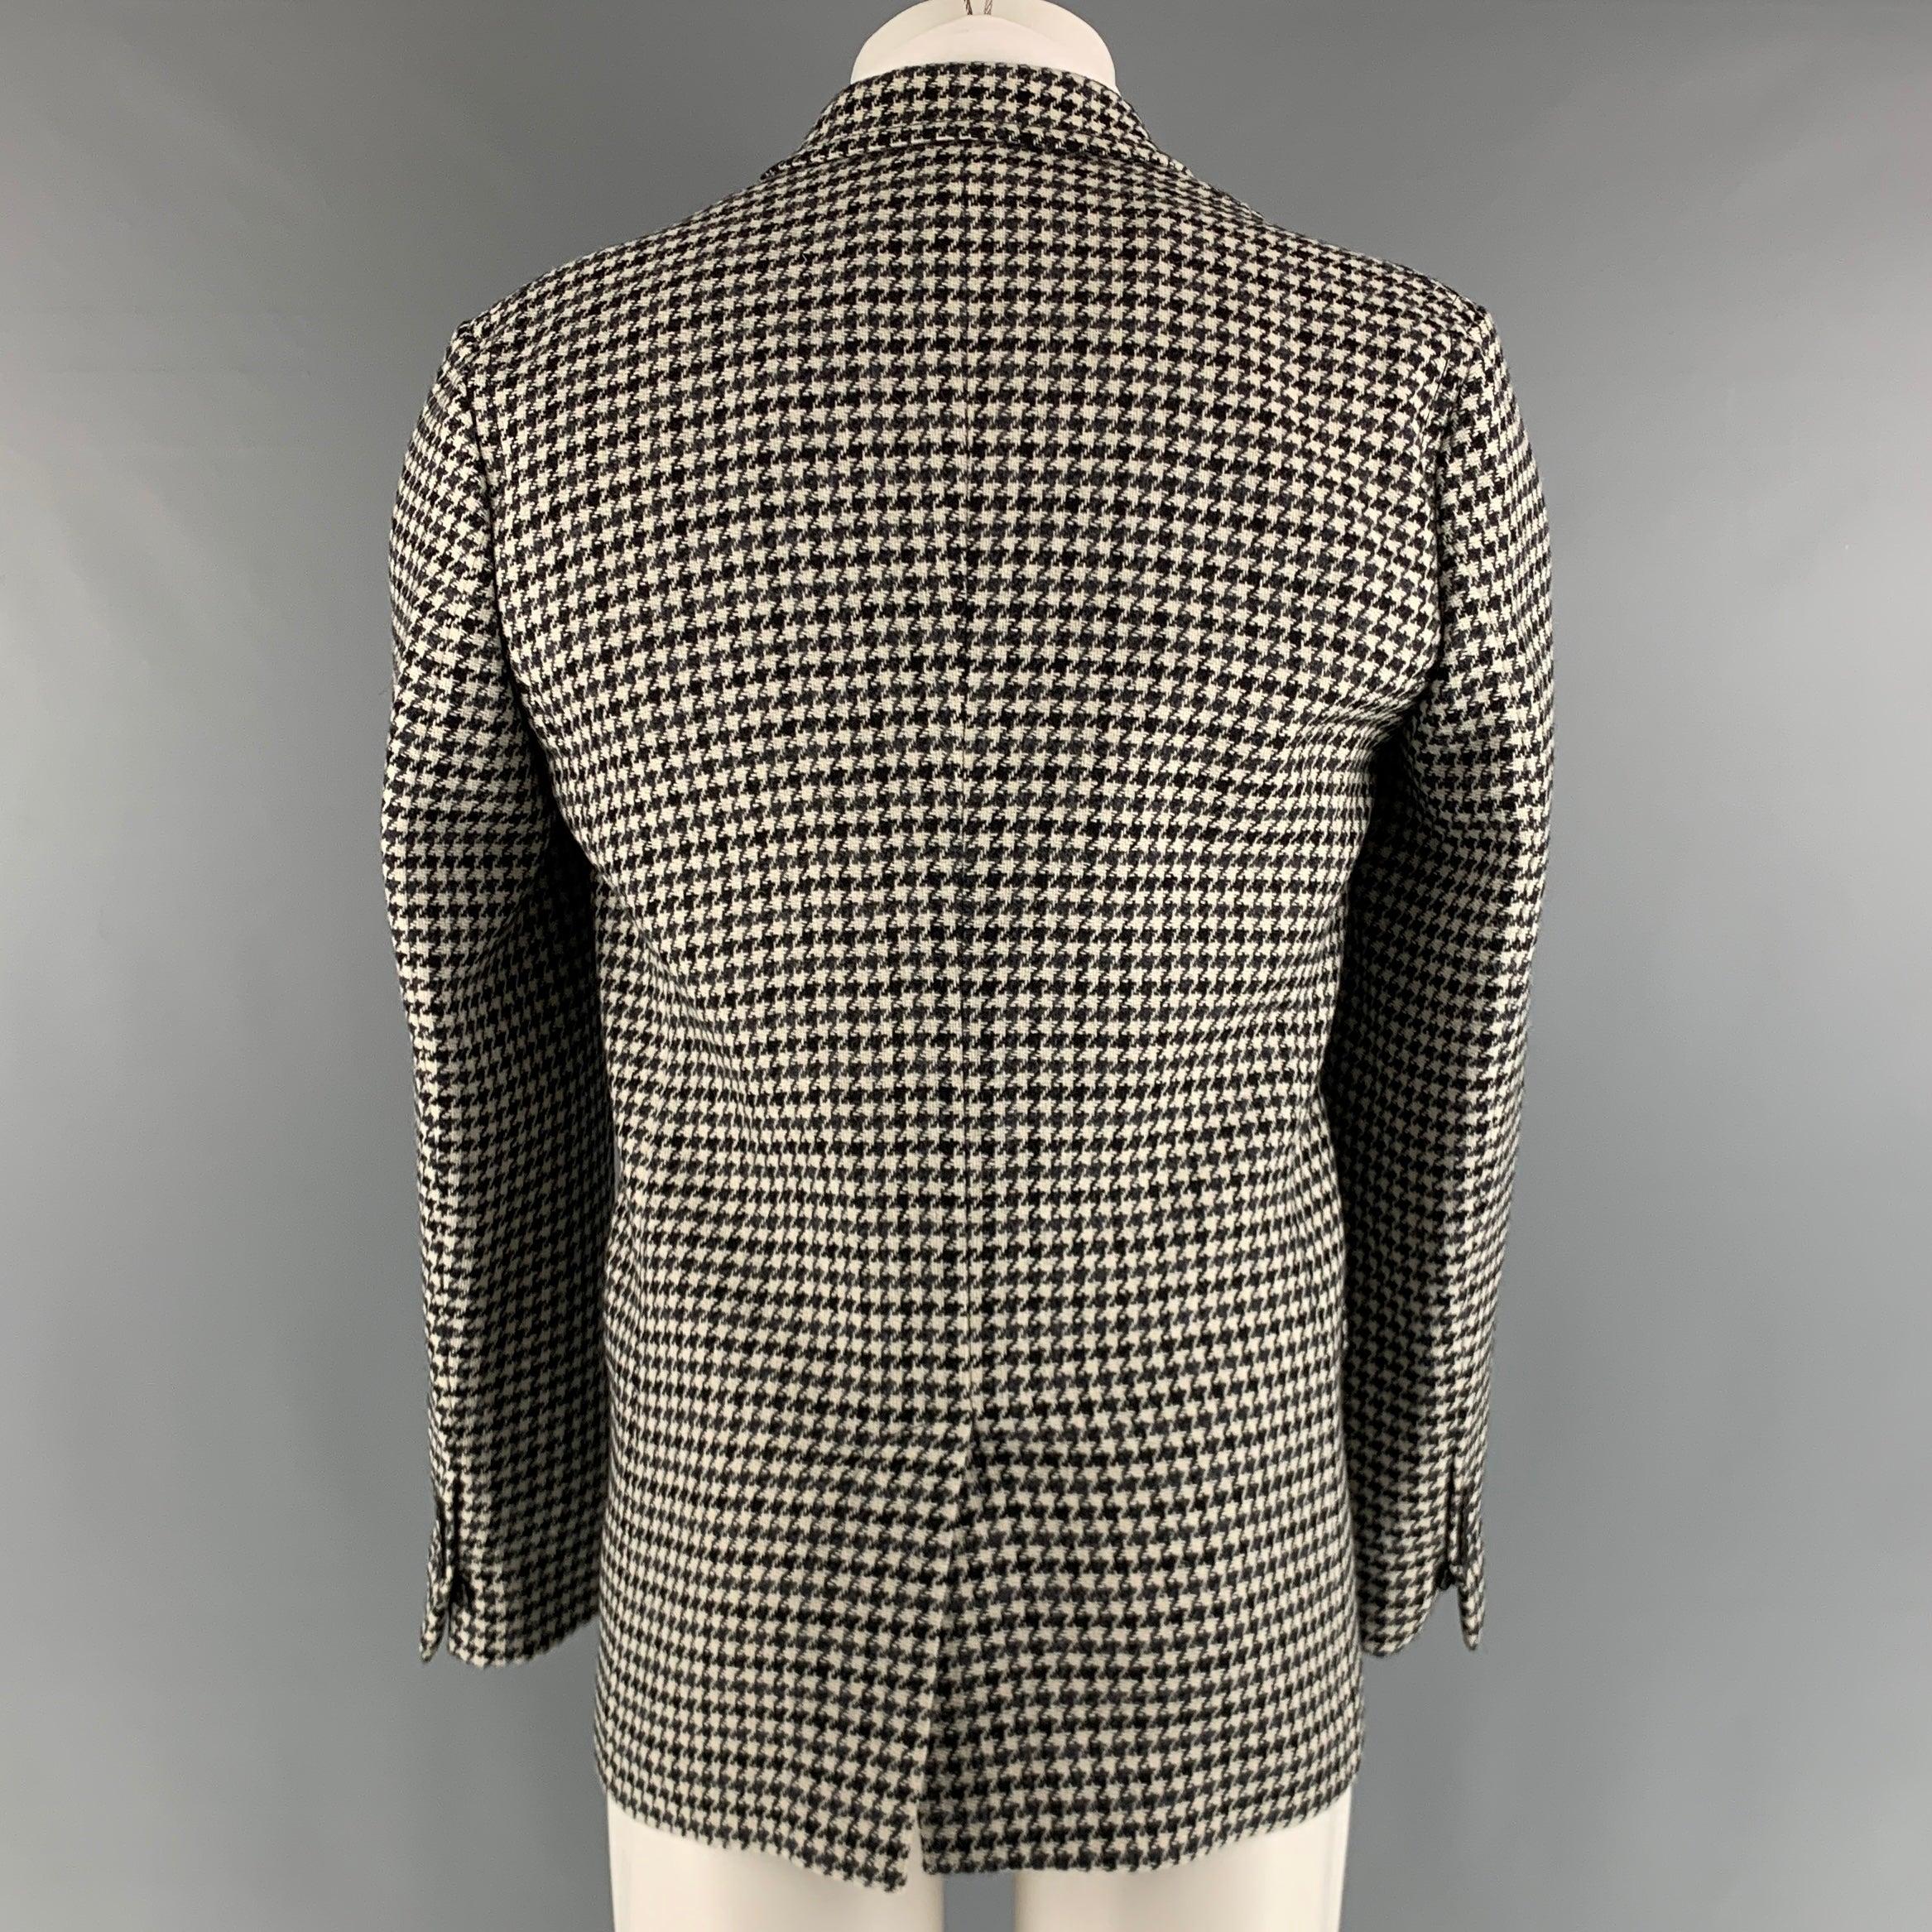 MARC JACOBS Size 38 Black White Houndstooth Wool Notch Lapel Sport Coat In Excellent Condition For Sale In San Francisco, CA